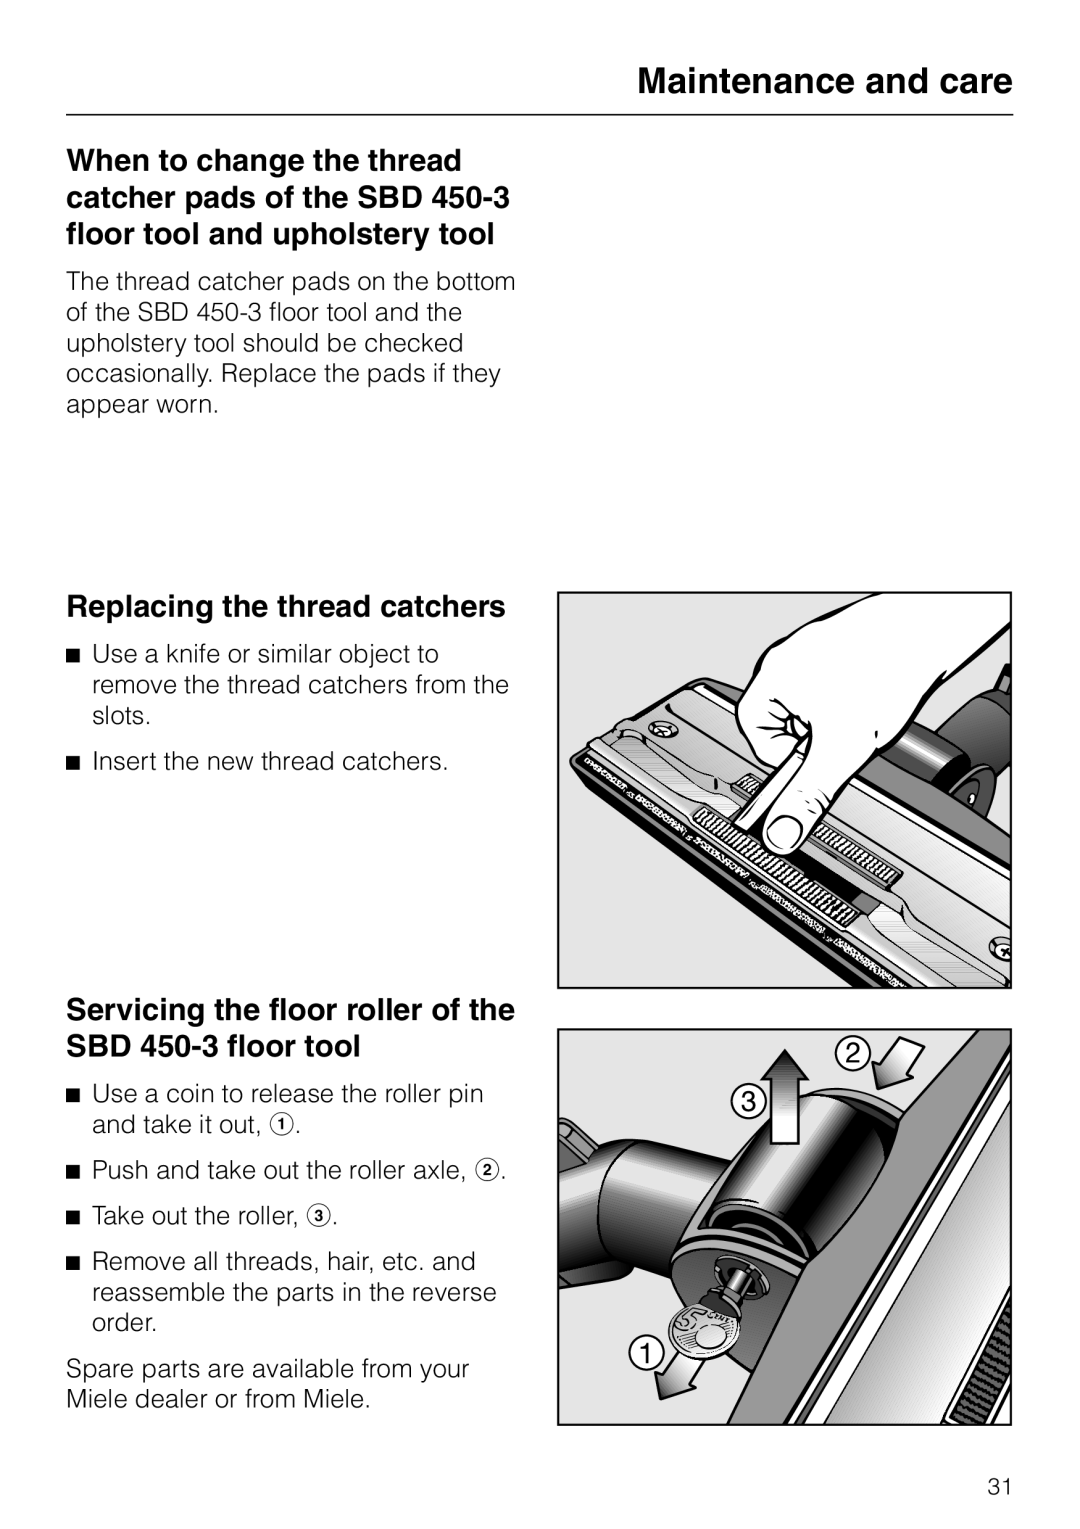 Miele S 4000 manual Maintenance and care, Replacing the thread catchers 